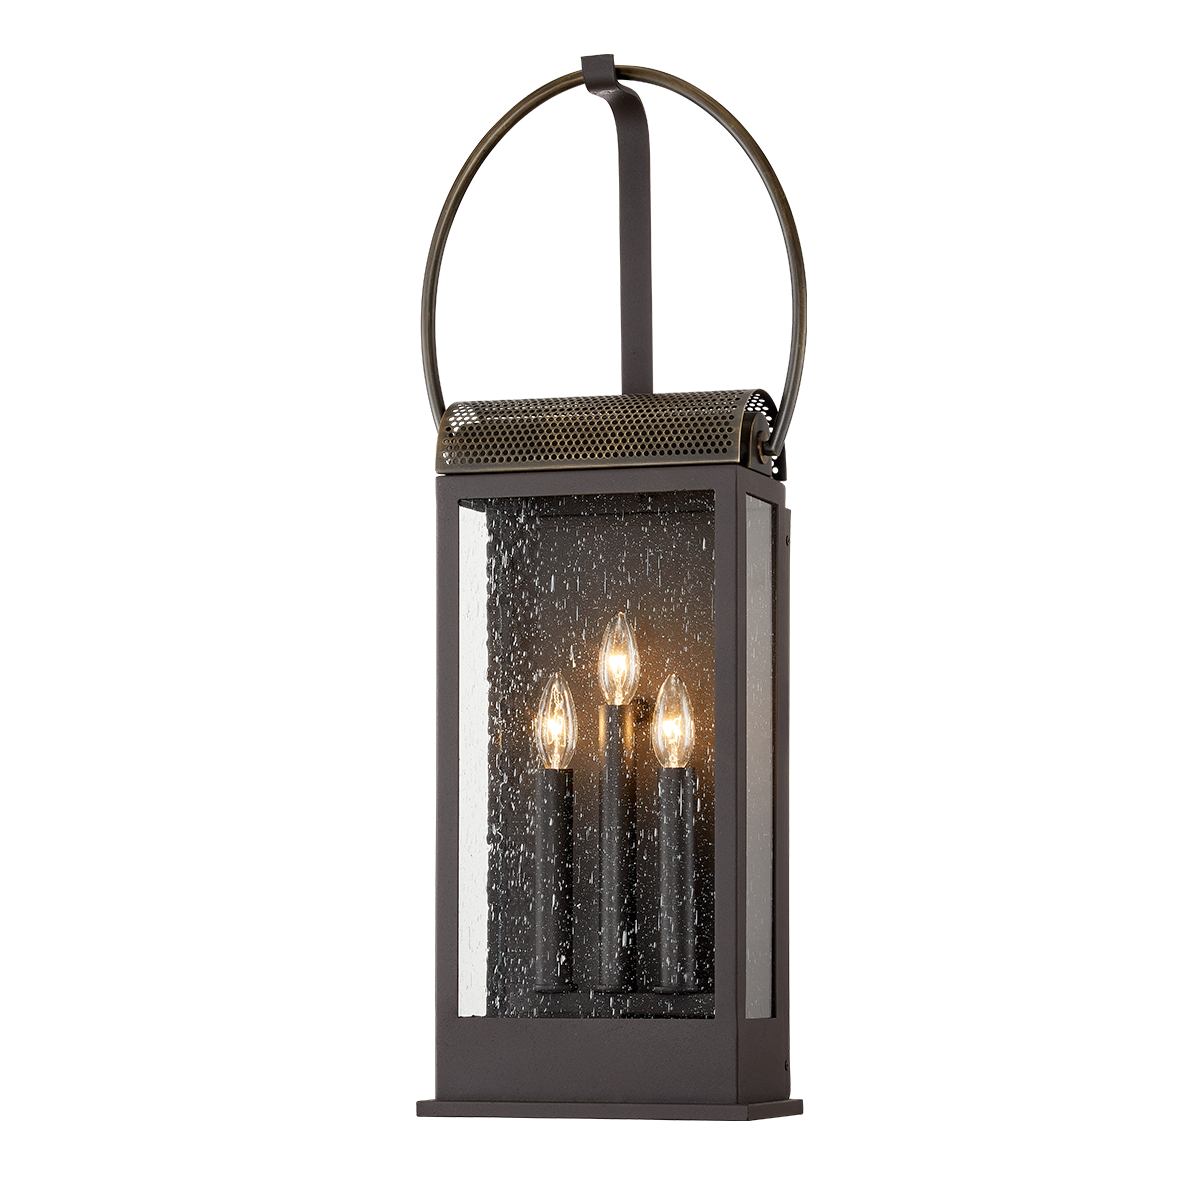 Troy Lighting HOLMES 3LT WALL B7423 Outdoor l Wall Troy Lighting BRONZE AND BRASS  